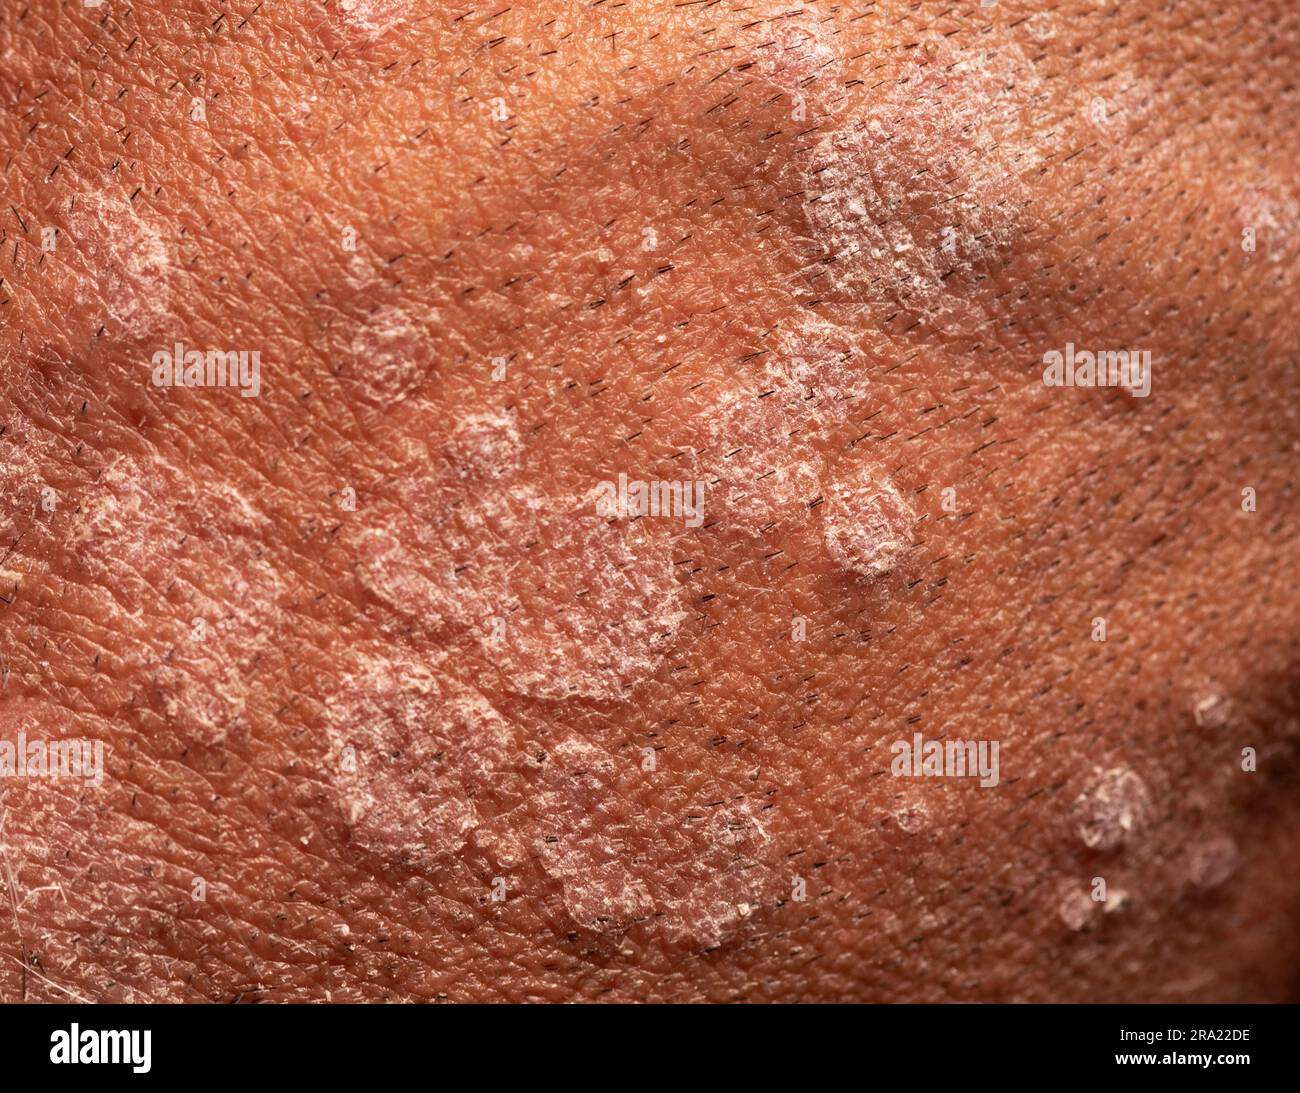 Close-up view of fungal infection of scalp hair. Tinea capitis, ringworm or herpes tonsurans infection. Stock Photo